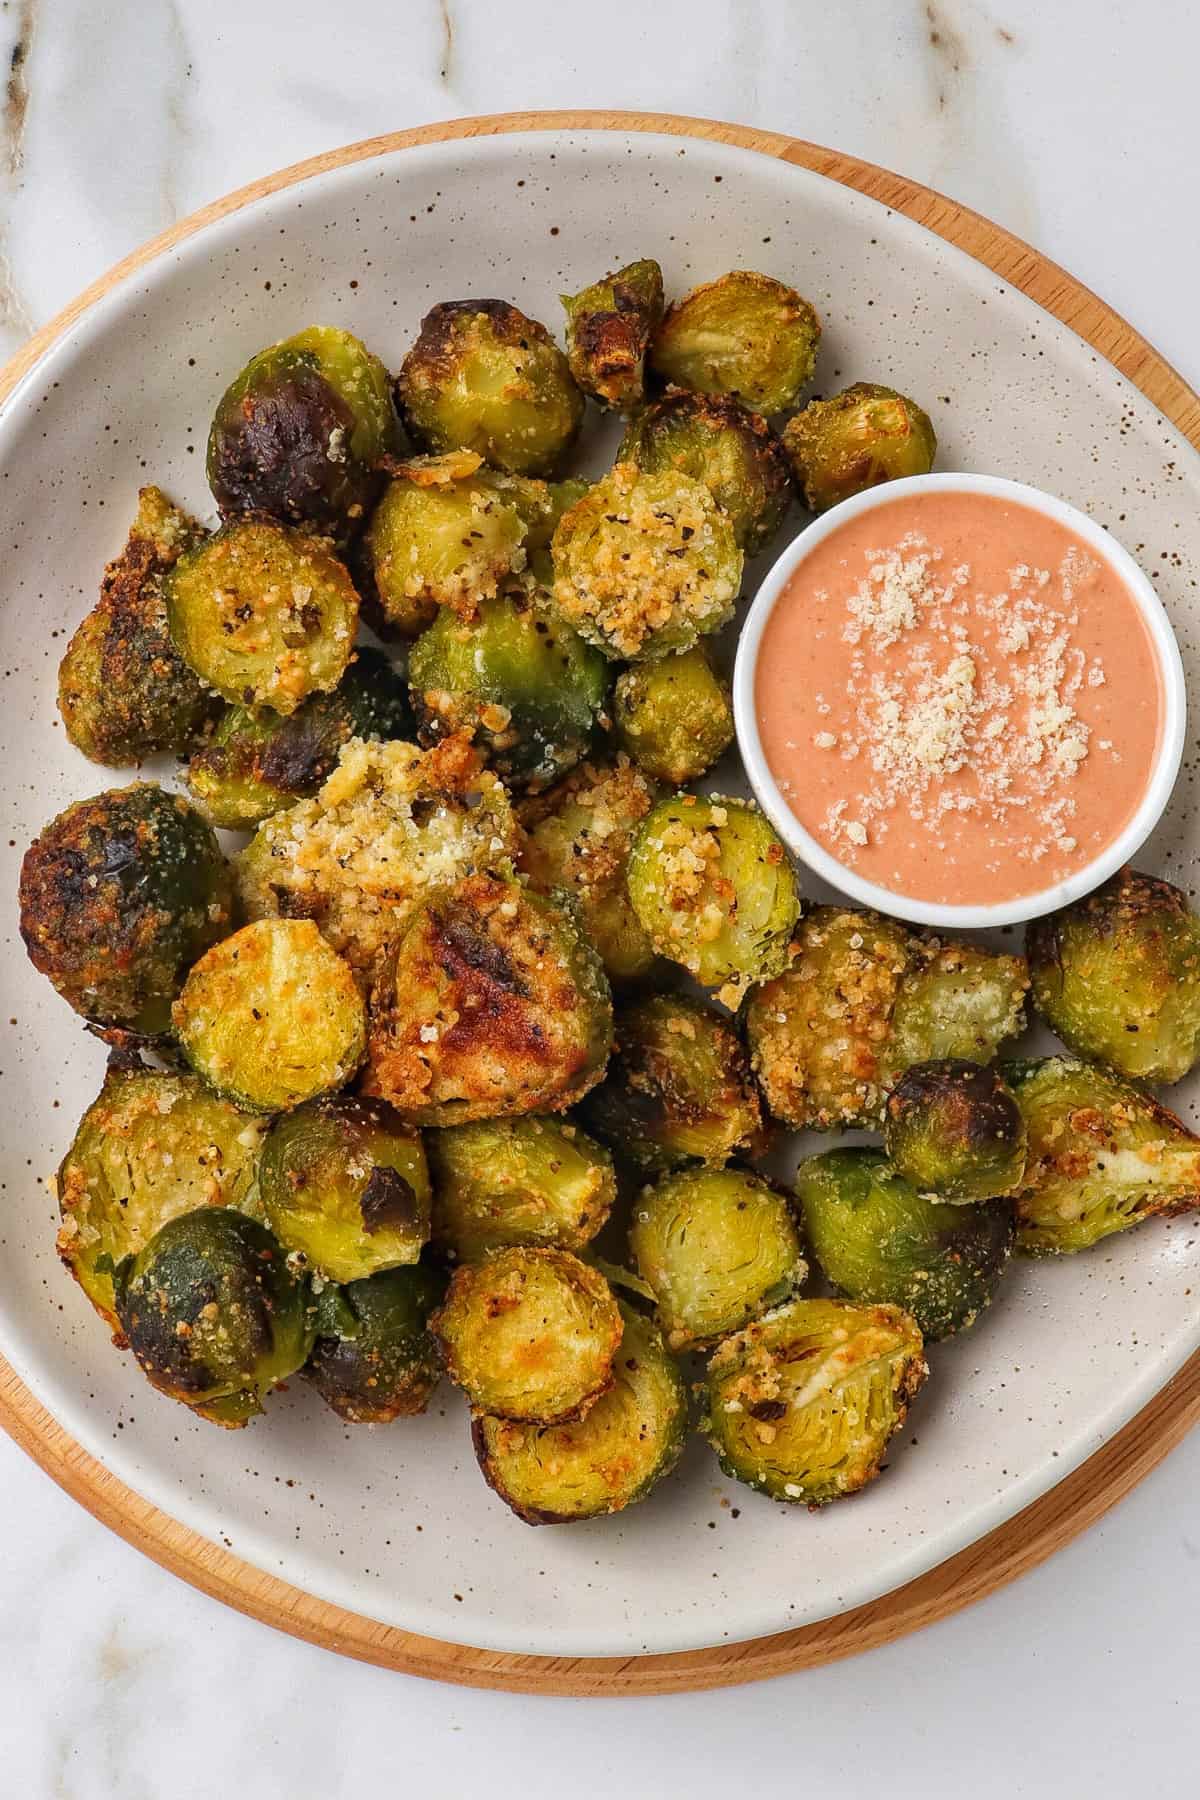 Air fryer roasted Brussels sprouts on a wooden board with creamy tomato sauce.